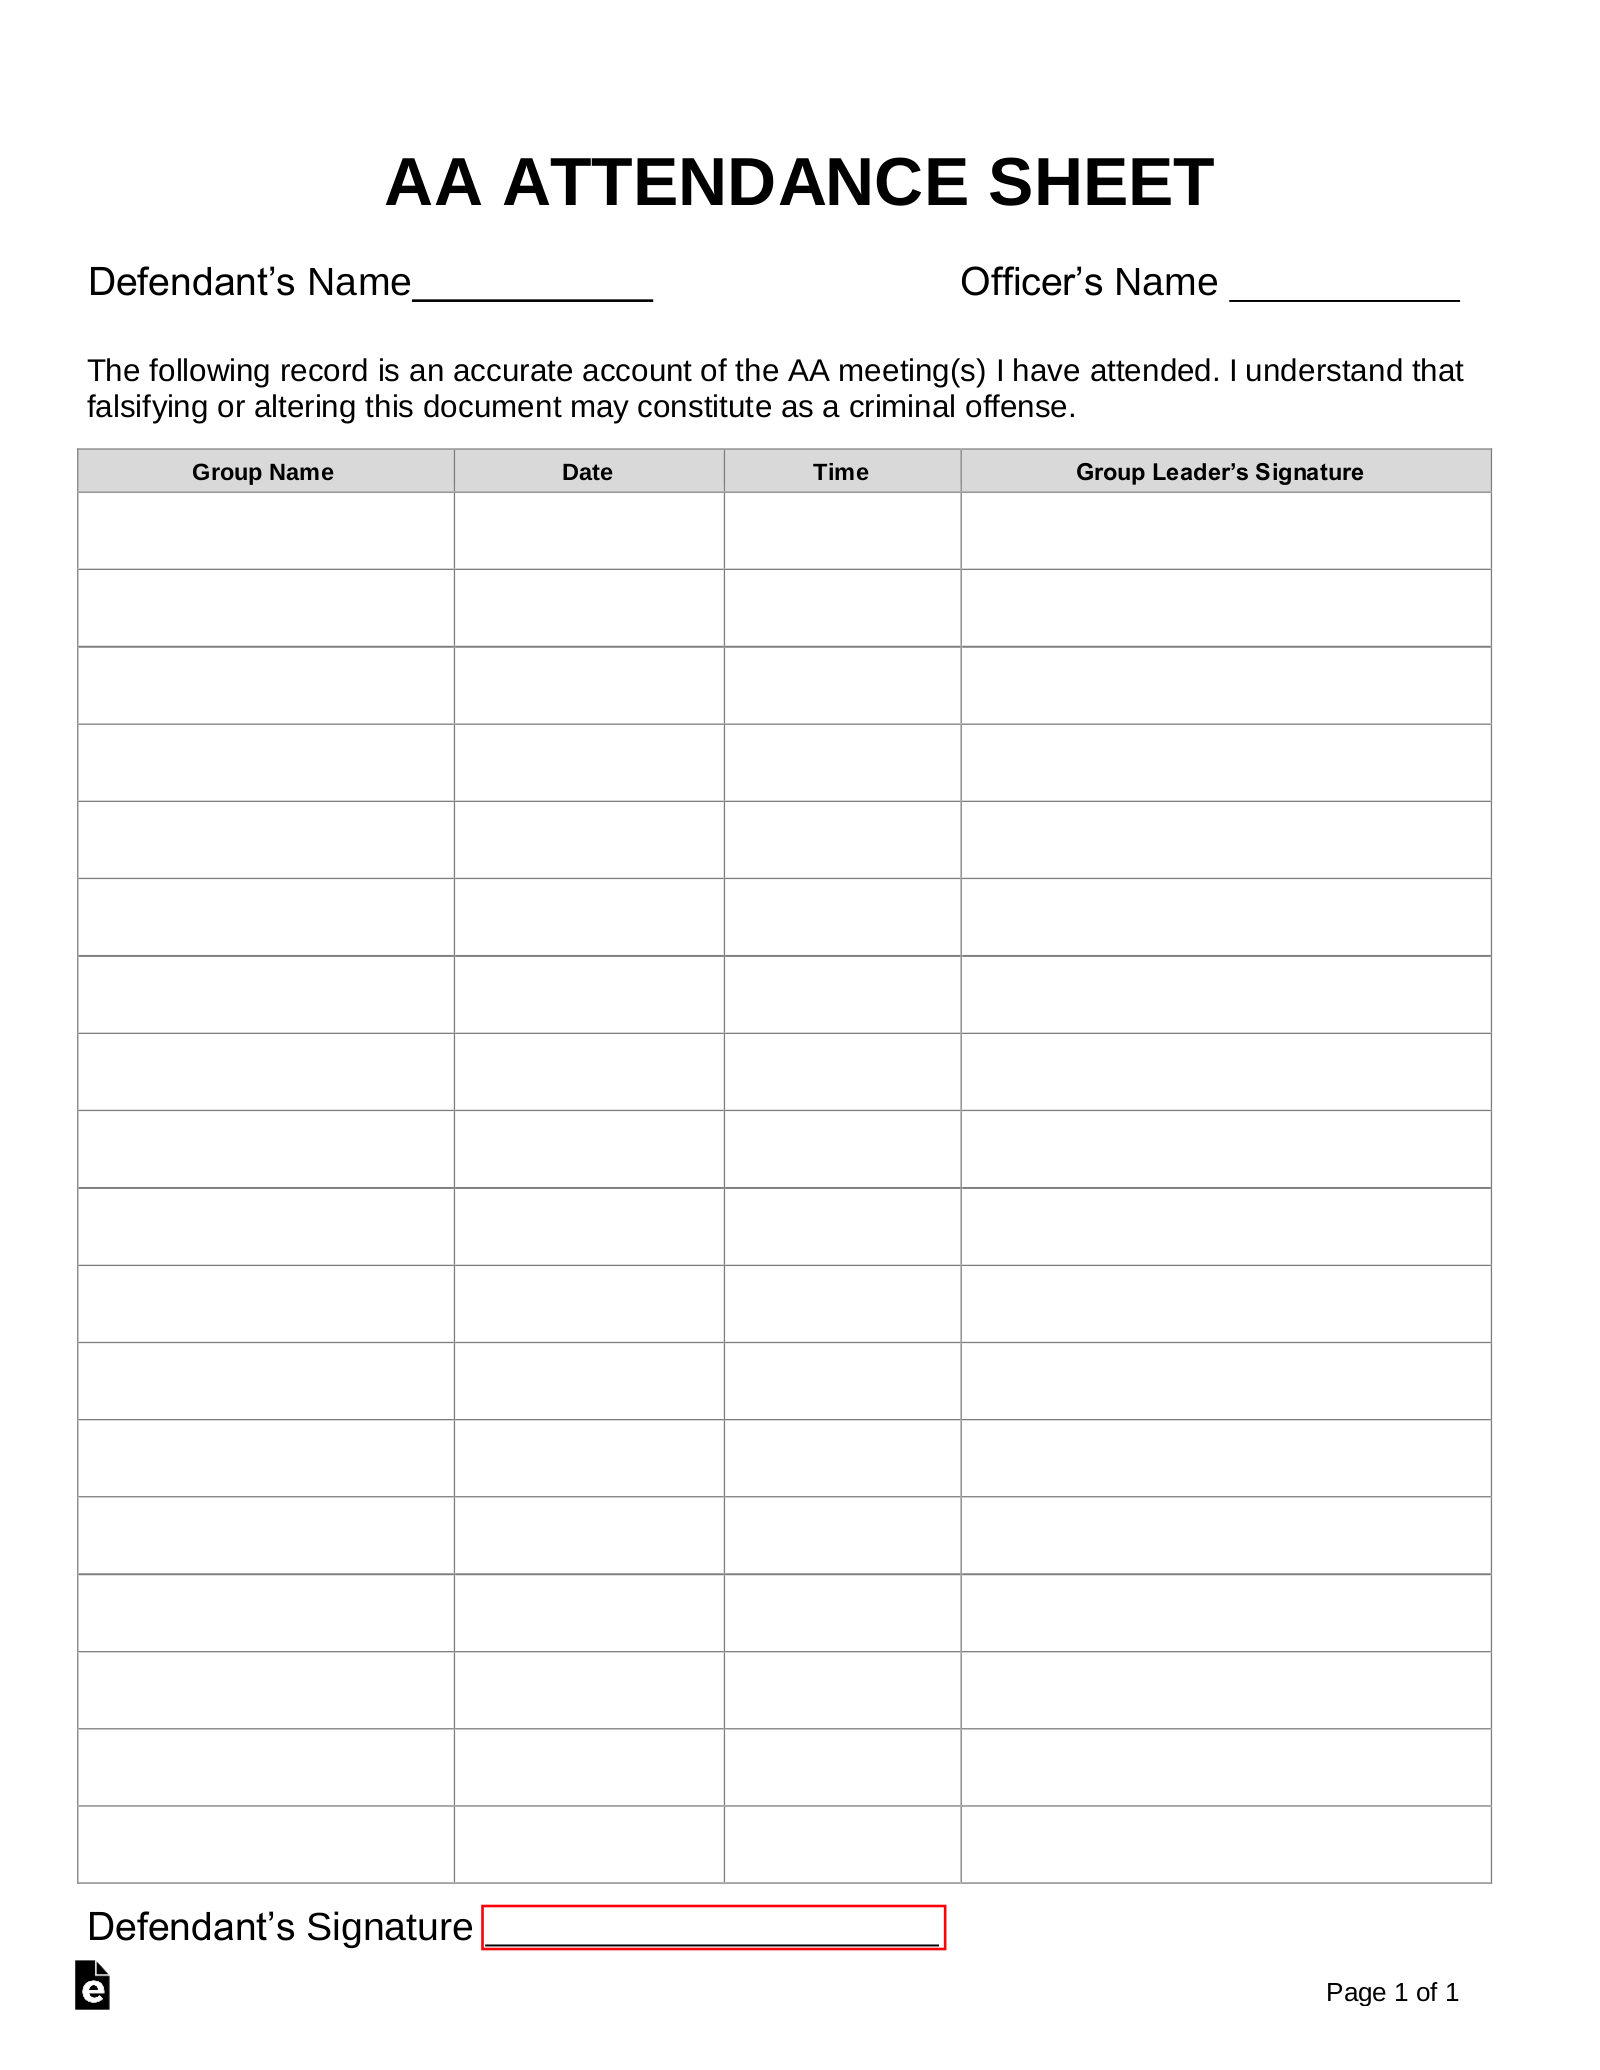 Alcoholics Anonymous (AA) Sign-in/Attendance Sheet Template